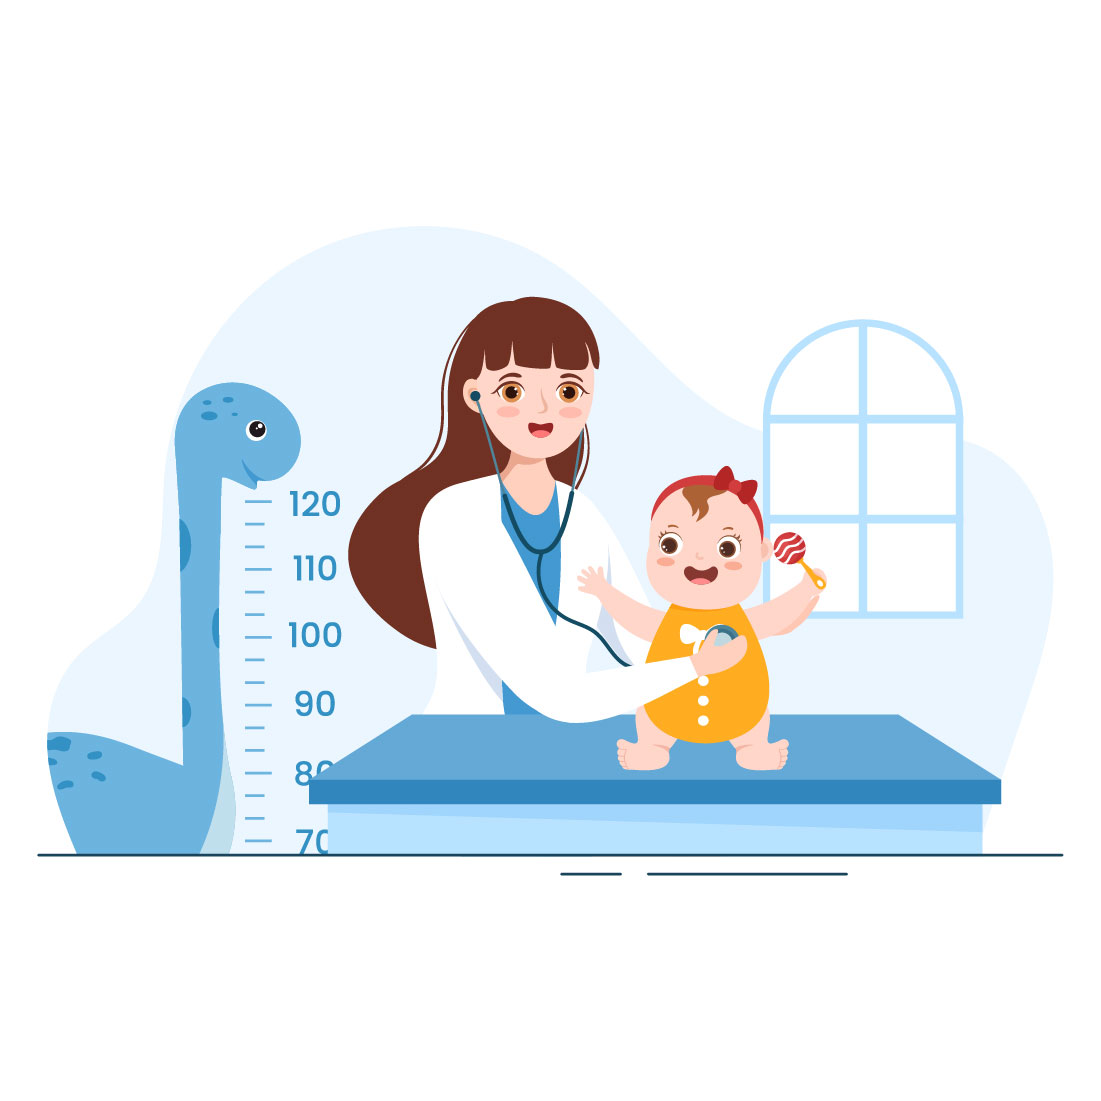 Pediatrician and Baby Graphics Design cover image.